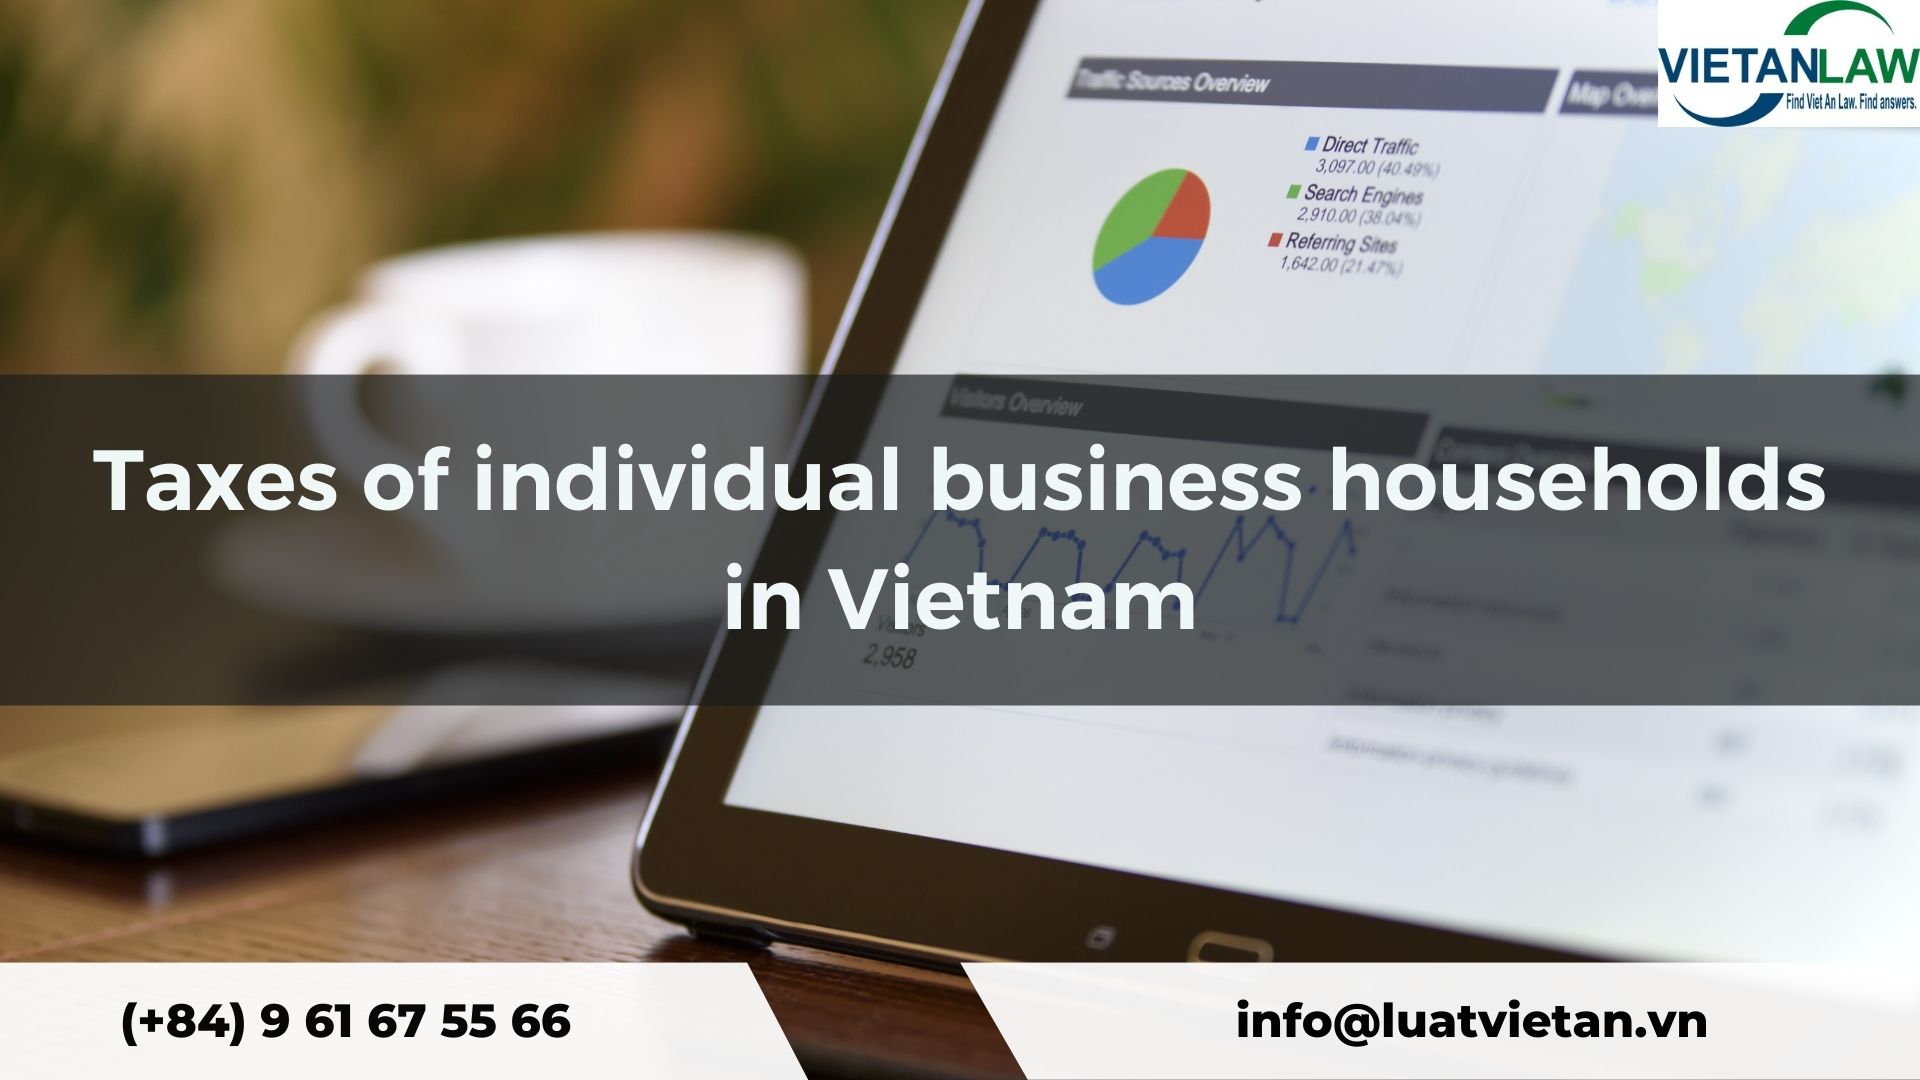 Taxes of individual business households in Vietnam